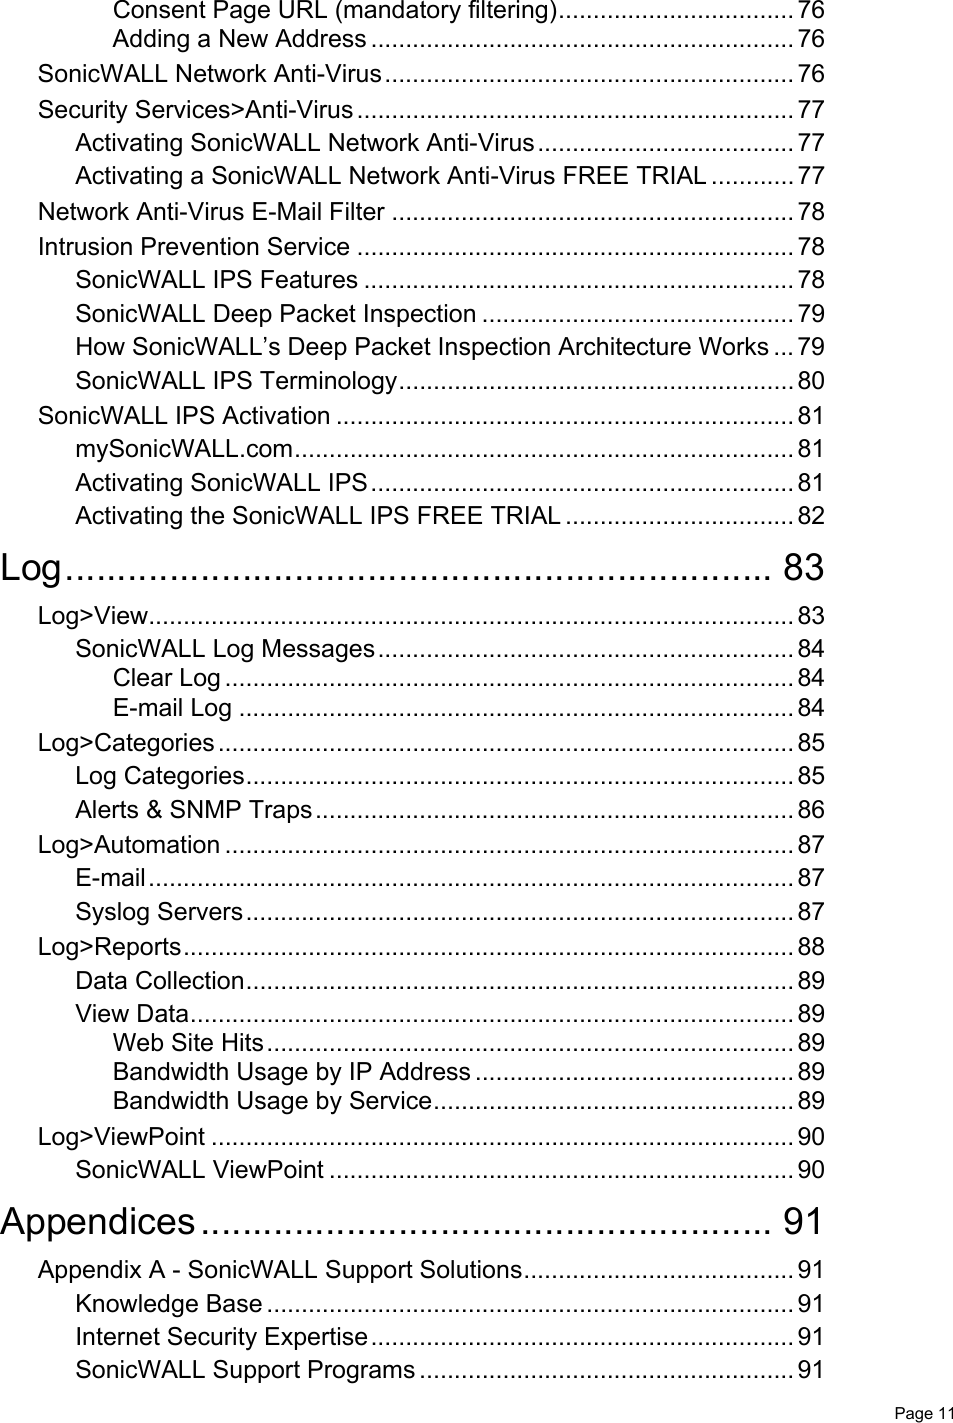   Page 11Consent Page URL (mandatory filtering).................................. 76Adding a New Address ............................................................. 76SonicWALL Network Anti-Virus........................................................... 76Security Services&gt;Anti-Virus ............................................................... 77Activating SonicWALL Network Anti-Virus..................................... 77Activating a SonicWALL Network Anti-Virus FREE TRIAL ............ 77Network Anti-Virus E-Mail Filter .......................................................... 78Intrusion Prevention Service ............................................................... 78SonicWALL IPS Features .............................................................. 78SonicWALL Deep Packet Inspection ............................................. 79How SonicWALL’s Deep Packet Inspection Architecture Works ... 79SonicWALL IPS Terminology......................................................... 80SonicWALL IPS Activation .................................................................. 81mySonicWALL.com........................................................................ 81Activating SonicWALL IPS............................................................. 81Activating the SonicWALL IPS FREE TRIAL ................................. 82Log.................................................................... 83Log&gt;View............................................................................................. 83SonicWALL Log Messages............................................................ 84Clear Log .................................................................................. 84E-mail Log ................................................................................ 84Log&gt;Categories................................................................................... 85Log Categories............................................................................... 85Alerts &amp; SNMP Traps..................................................................... 86Log&gt;Automation .................................................................................. 87E-mail............................................................................................. 87Syslog Servers............................................................................... 87Log&gt;Reports........................................................................................ 88Data Collection............................................................................... 89View Data....................................................................................... 89Web Site Hits............................................................................ 89Bandwidth Usage by IP Address .............................................. 89Bandwidth Usage by Service.................................................... 89Log&gt;ViewPoint .................................................................................... 90SonicWALL ViewPoint ................................................................... 90Appendices....................................................... 91Appendix A - SonicWALL Support Solutions....................................... 91Knowledge Base ............................................................................ 91Internet Security Expertise............................................................. 91SonicWALL Support Programs ...................................................... 91